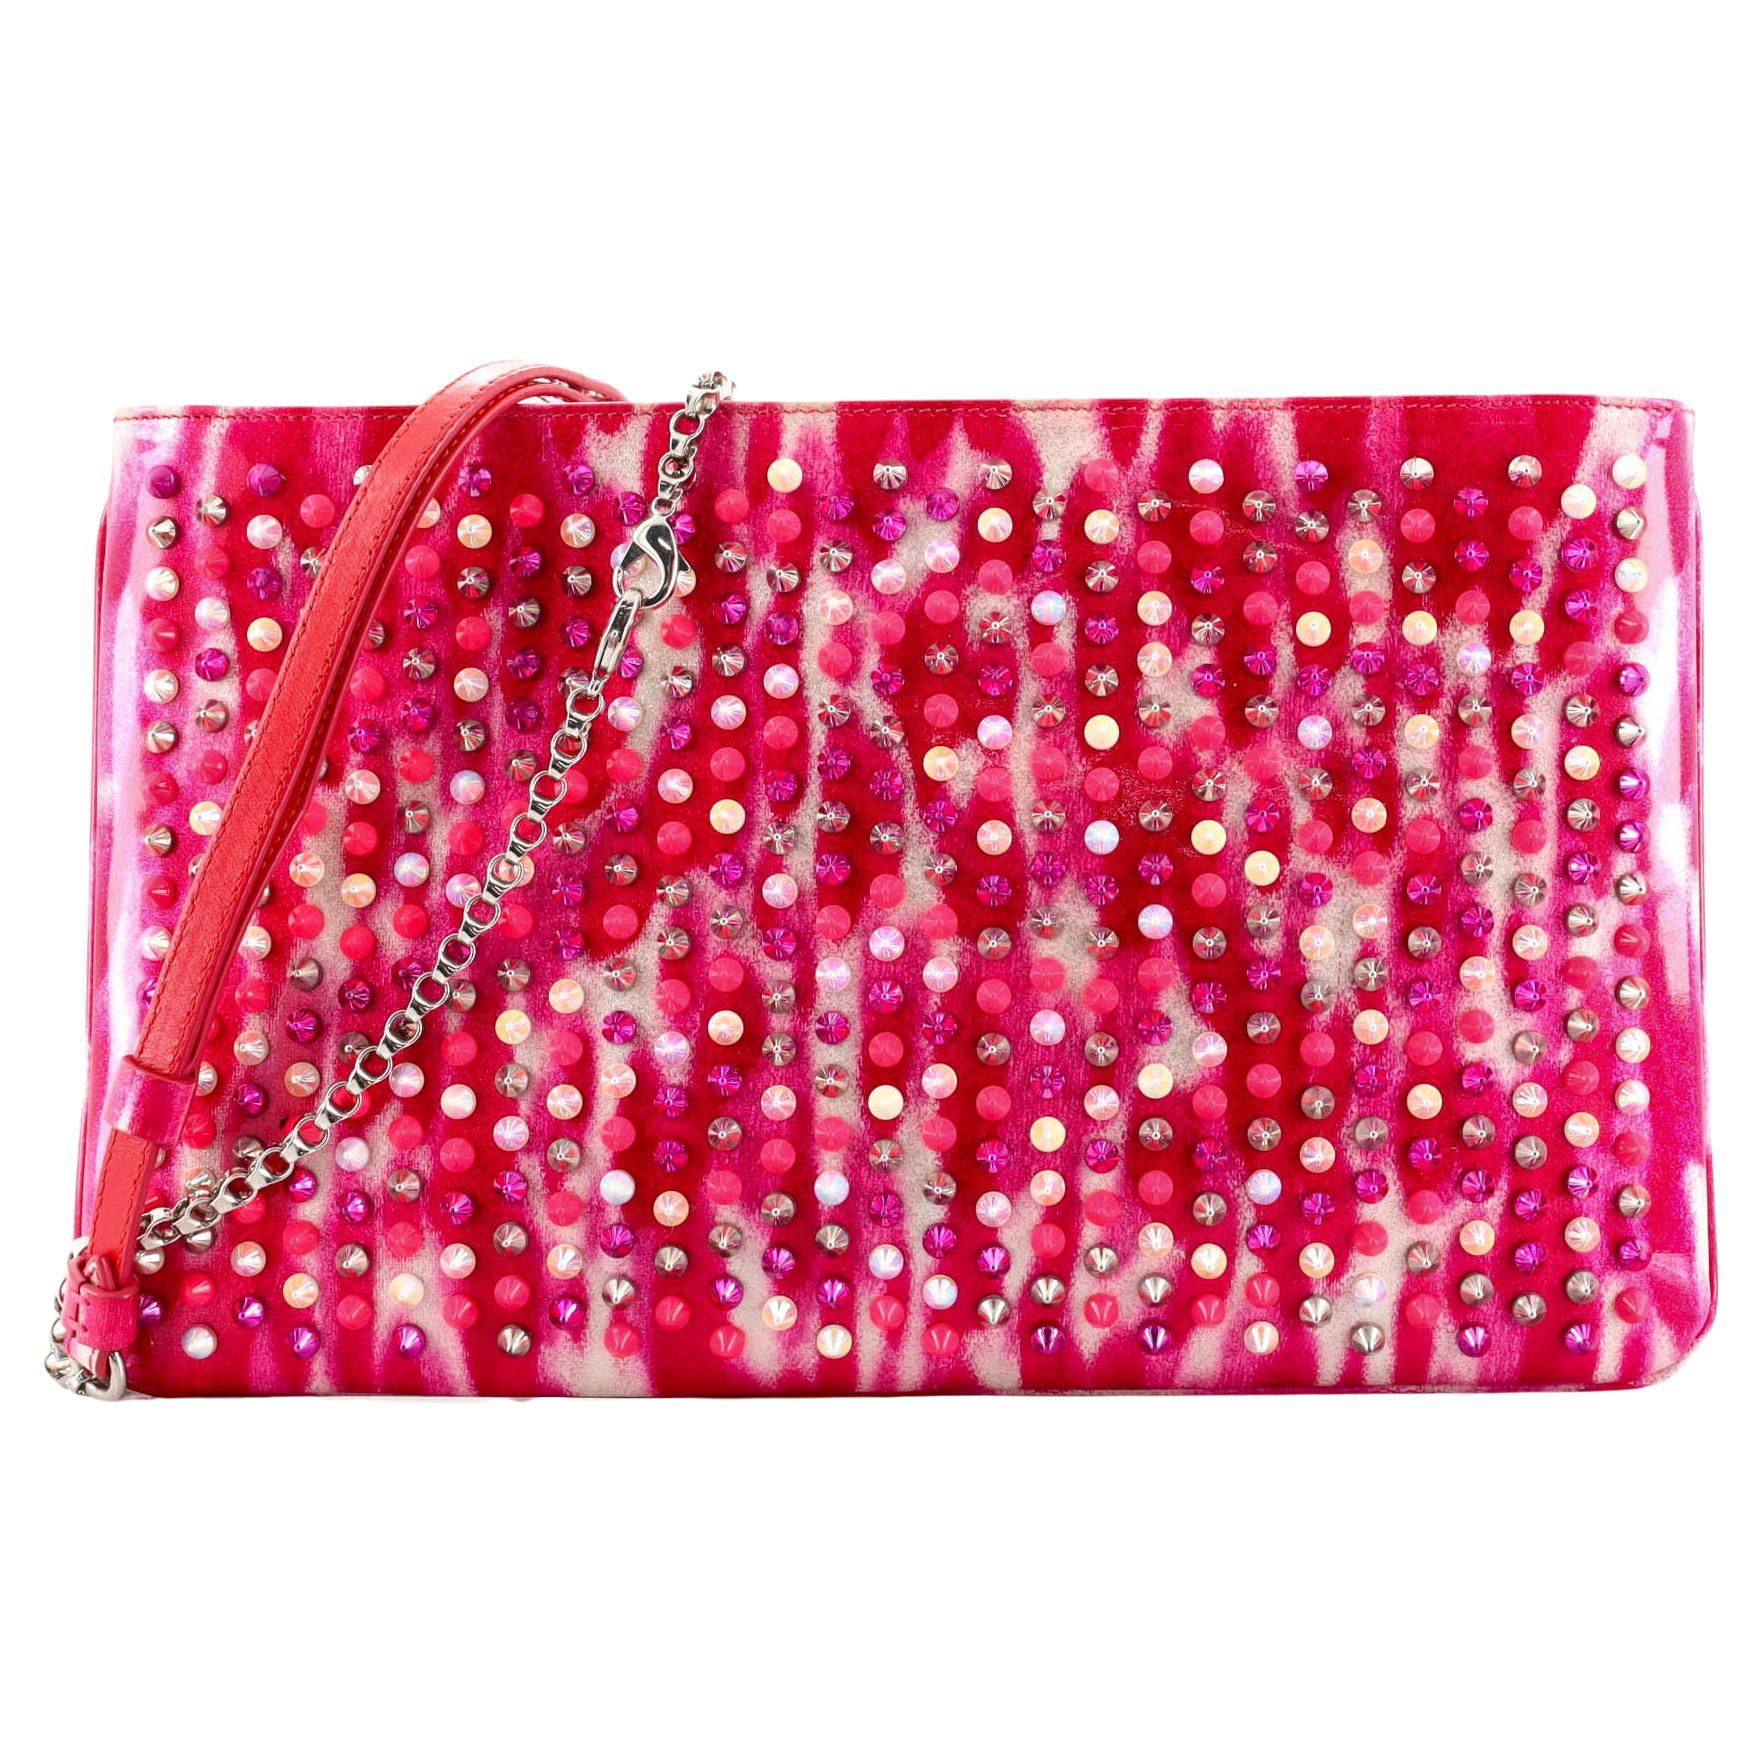 Christian Louboutin Loubiposh Clutch Printed Spiked Patent